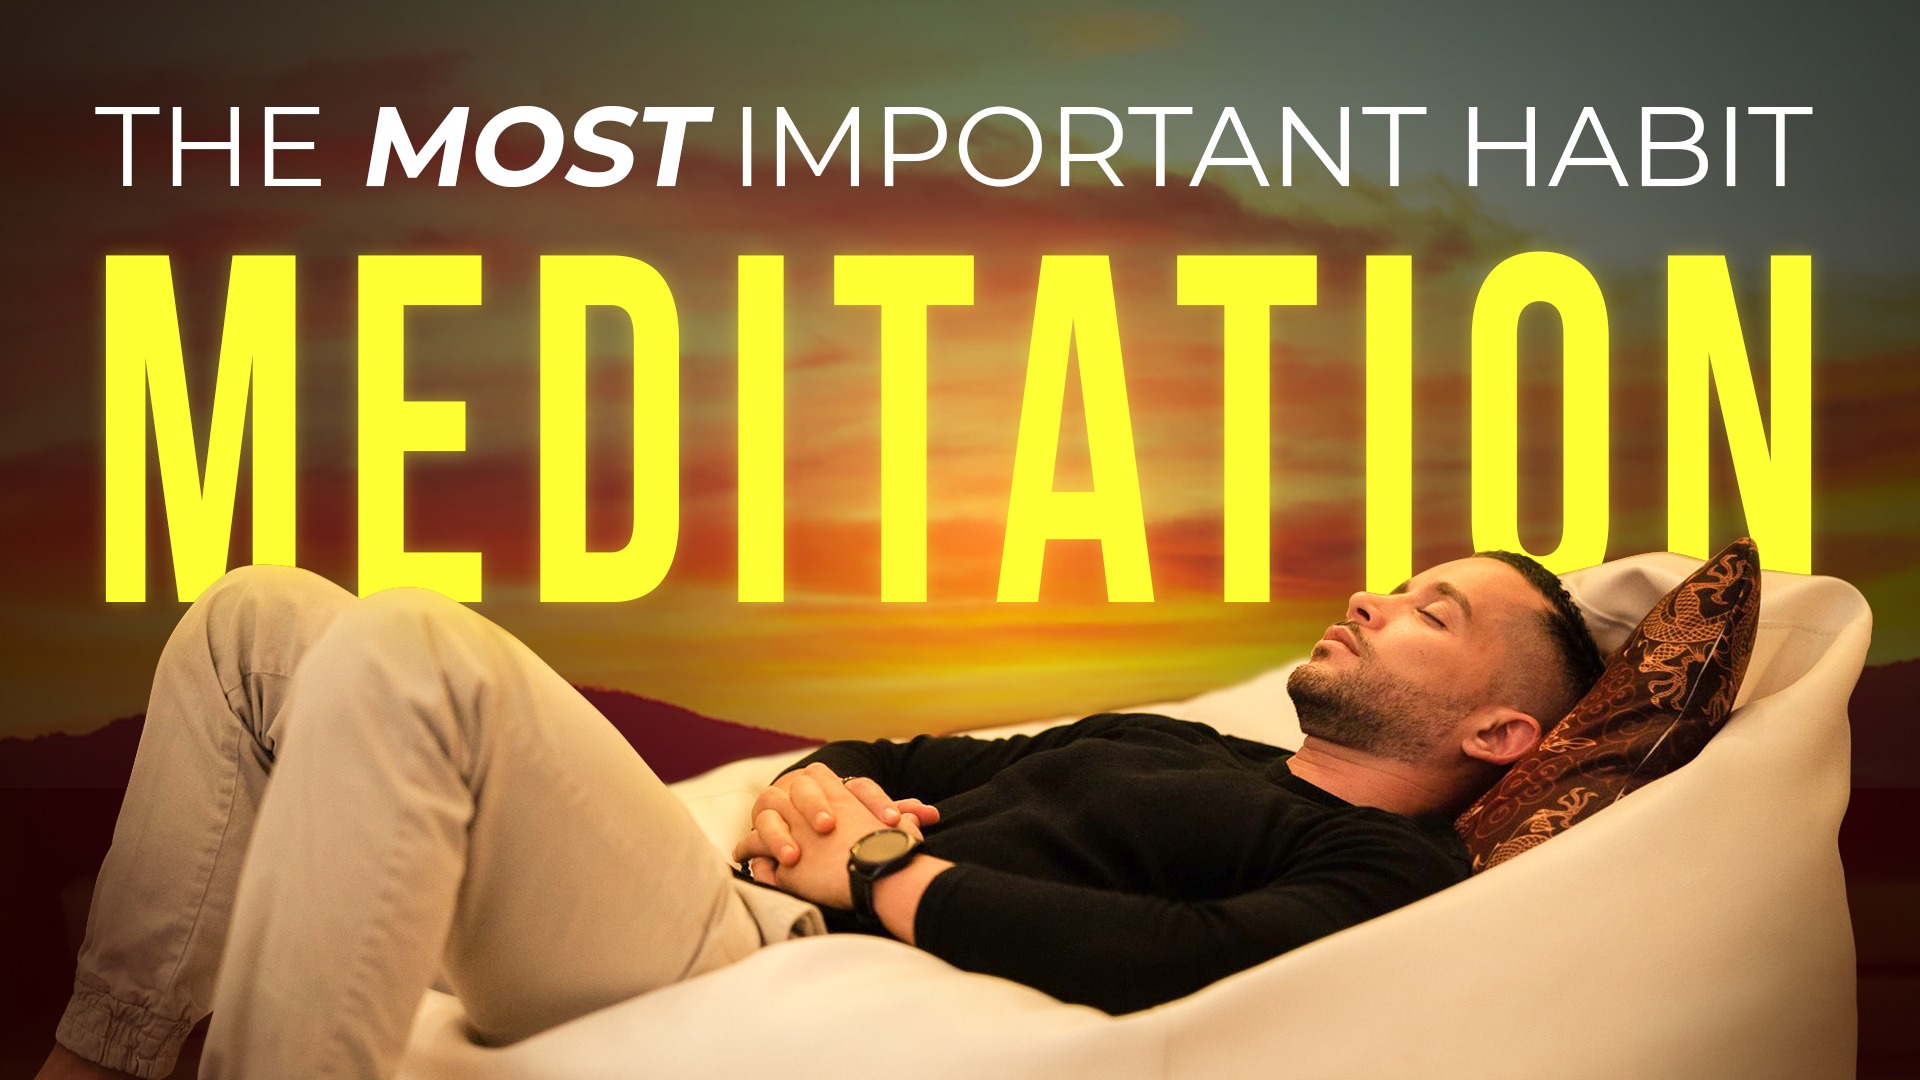 HOW TO MEDITATE EVERY DAY 8 YEARS OF EXPERIENCE SUMMARIZED IN 10 MINUTES